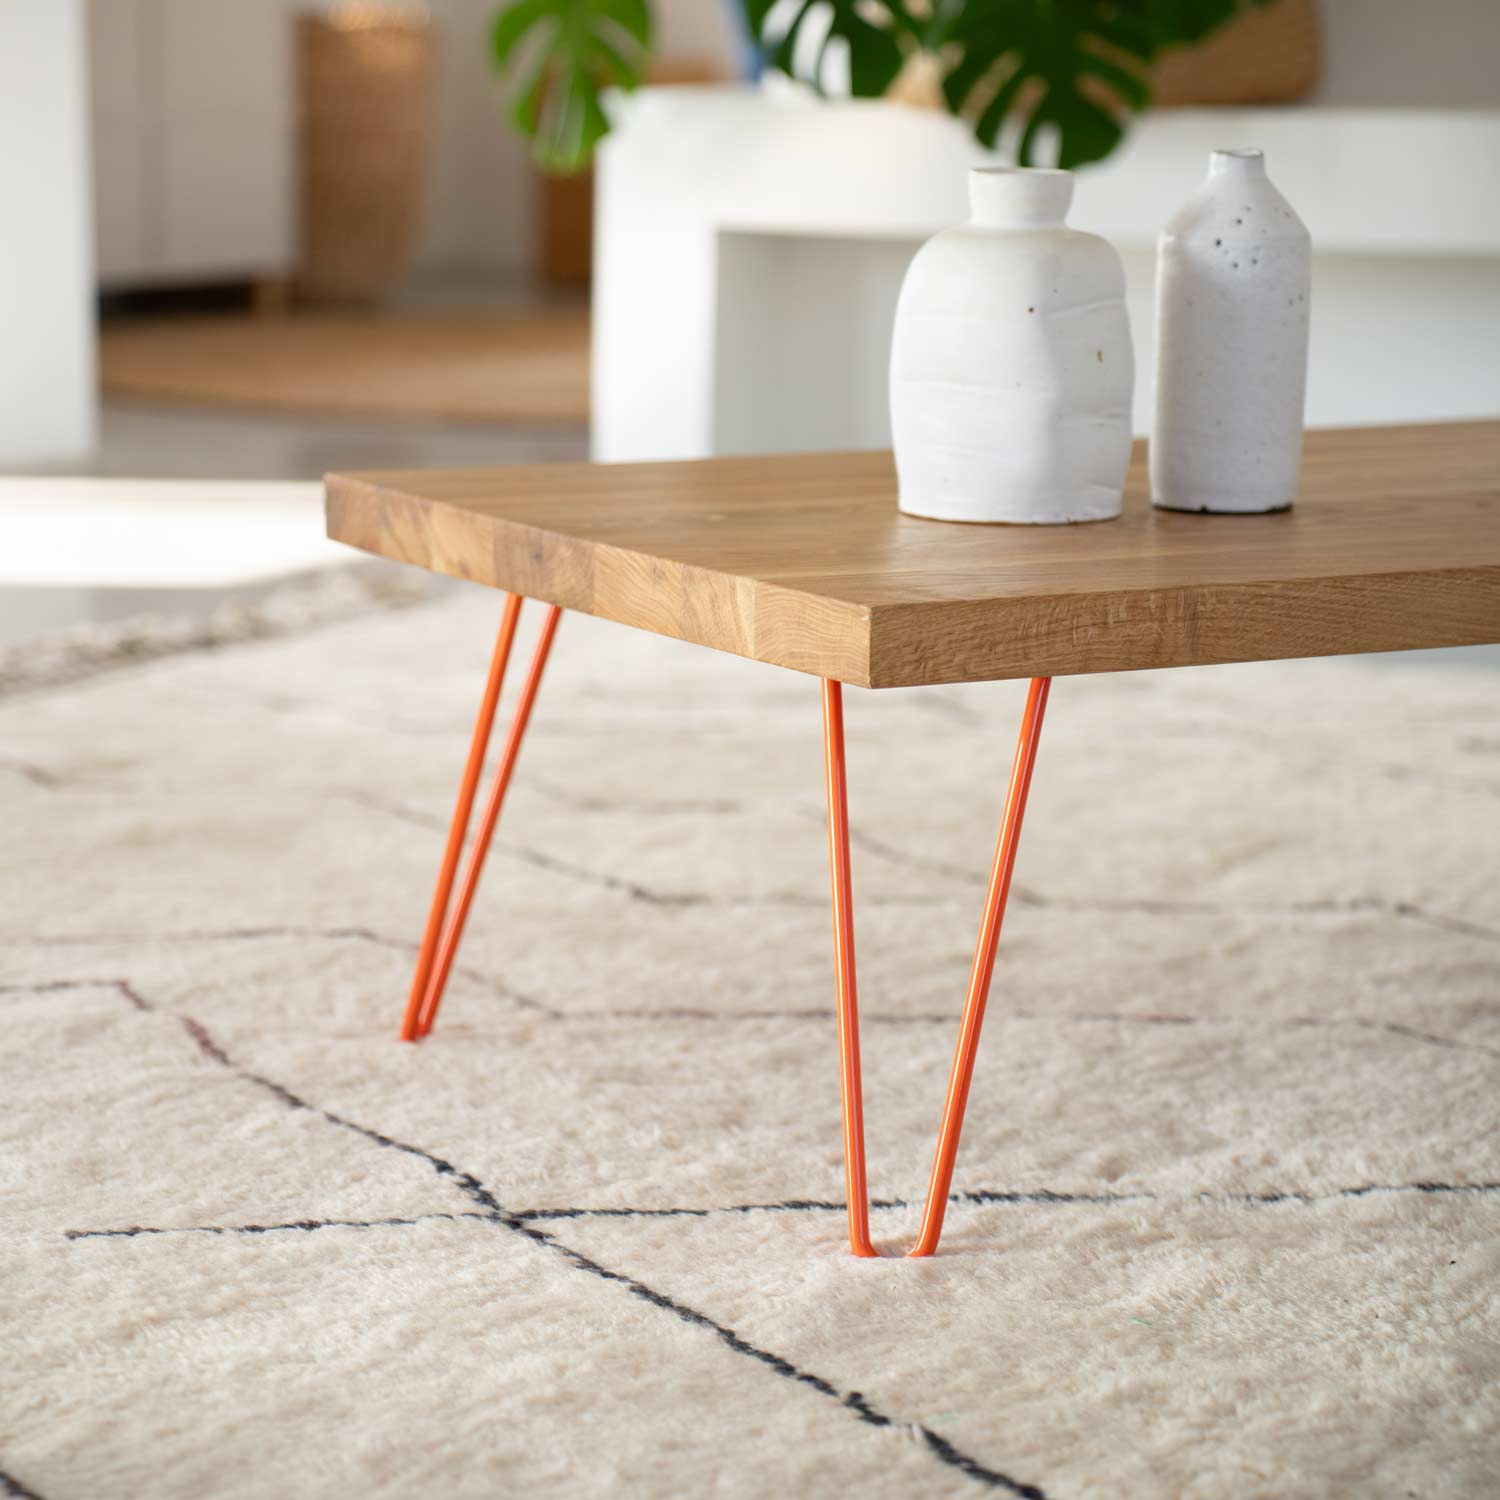 30cm Hairpin Legs - Low Coffee Table